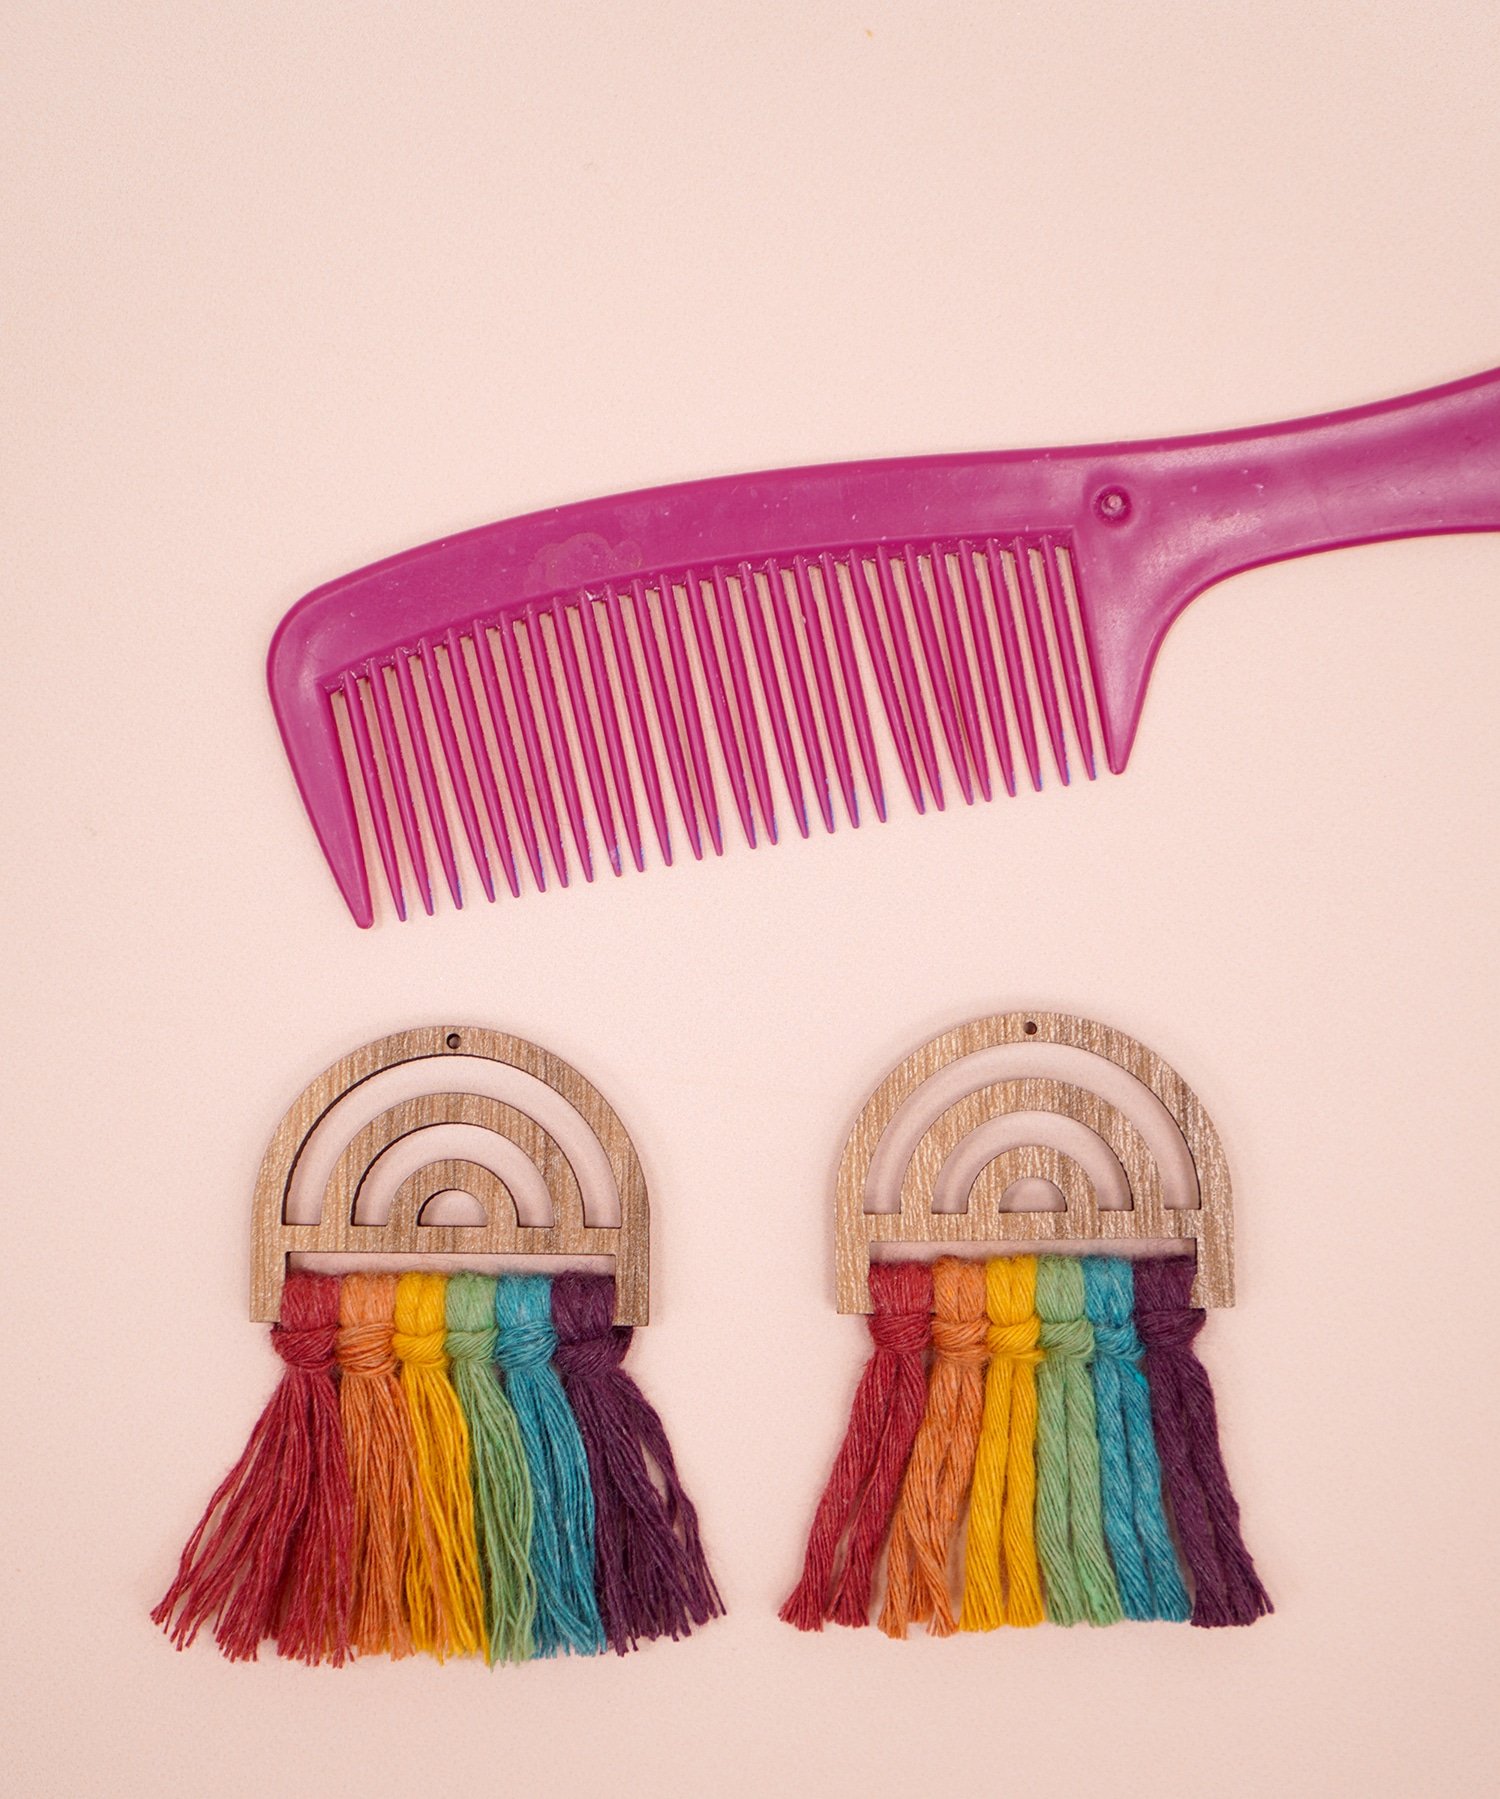 Comparing a brushed vs unbrushed rainbow wooden macrame earring with pink comb in background